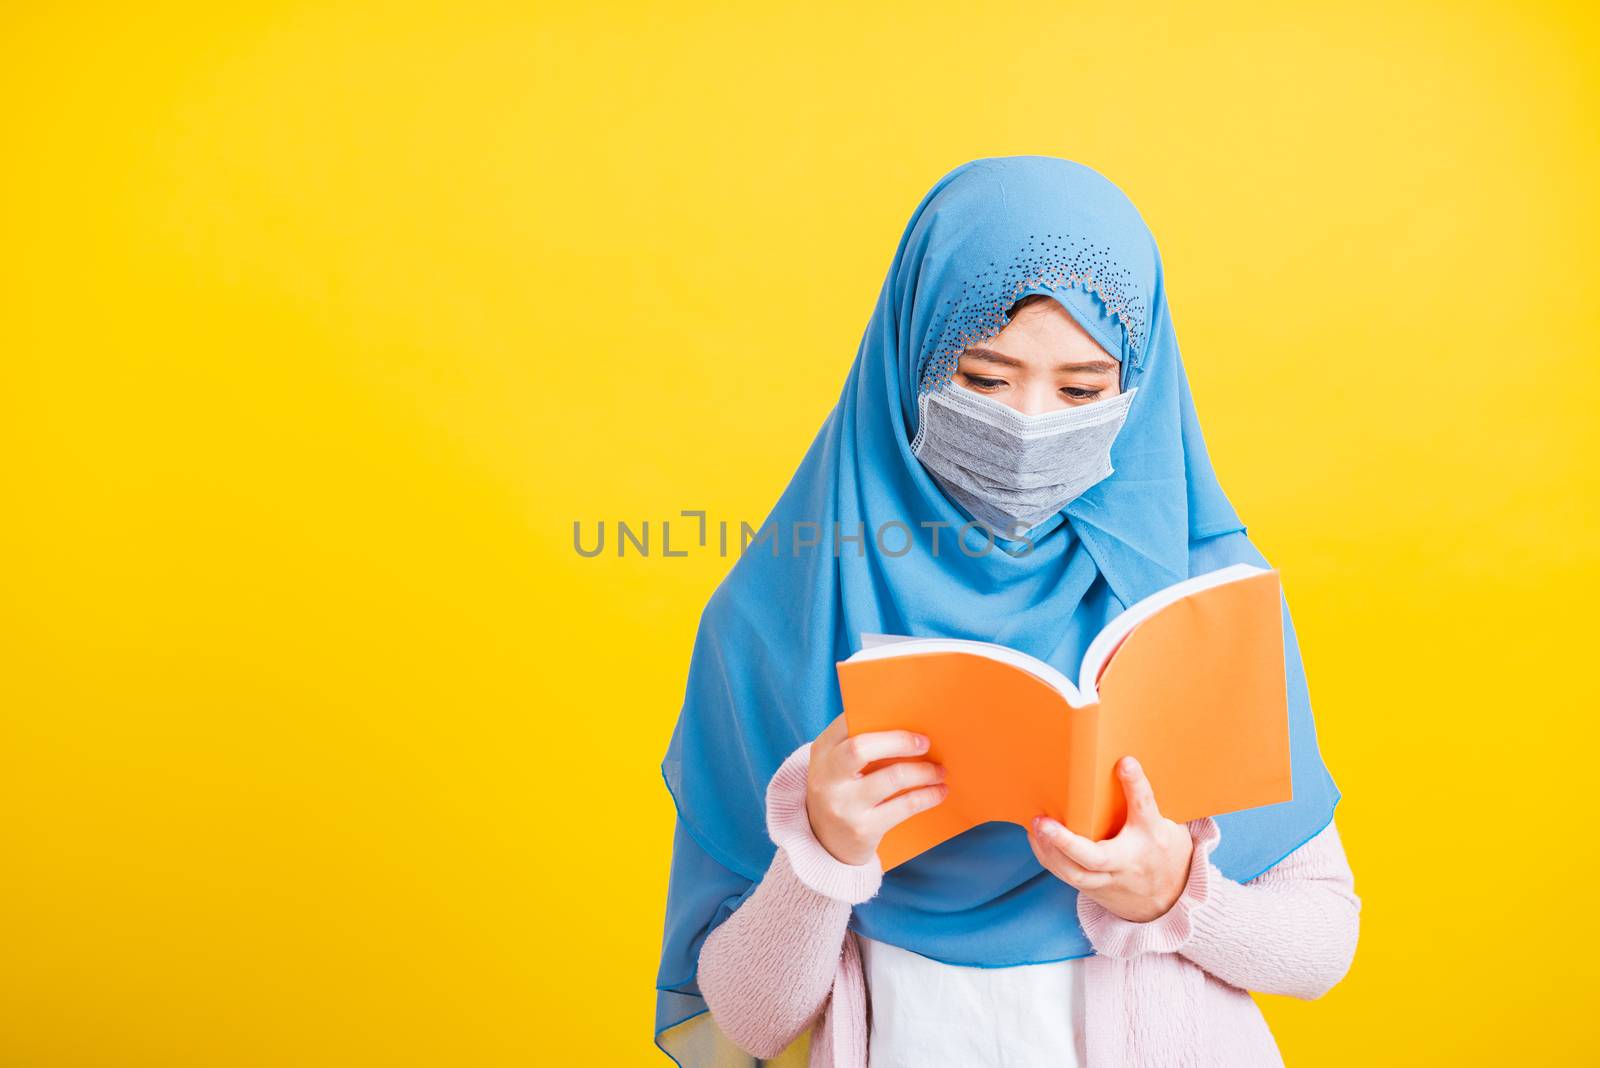 Woman wear hijab she hold book on hand and open reding it by Sorapop